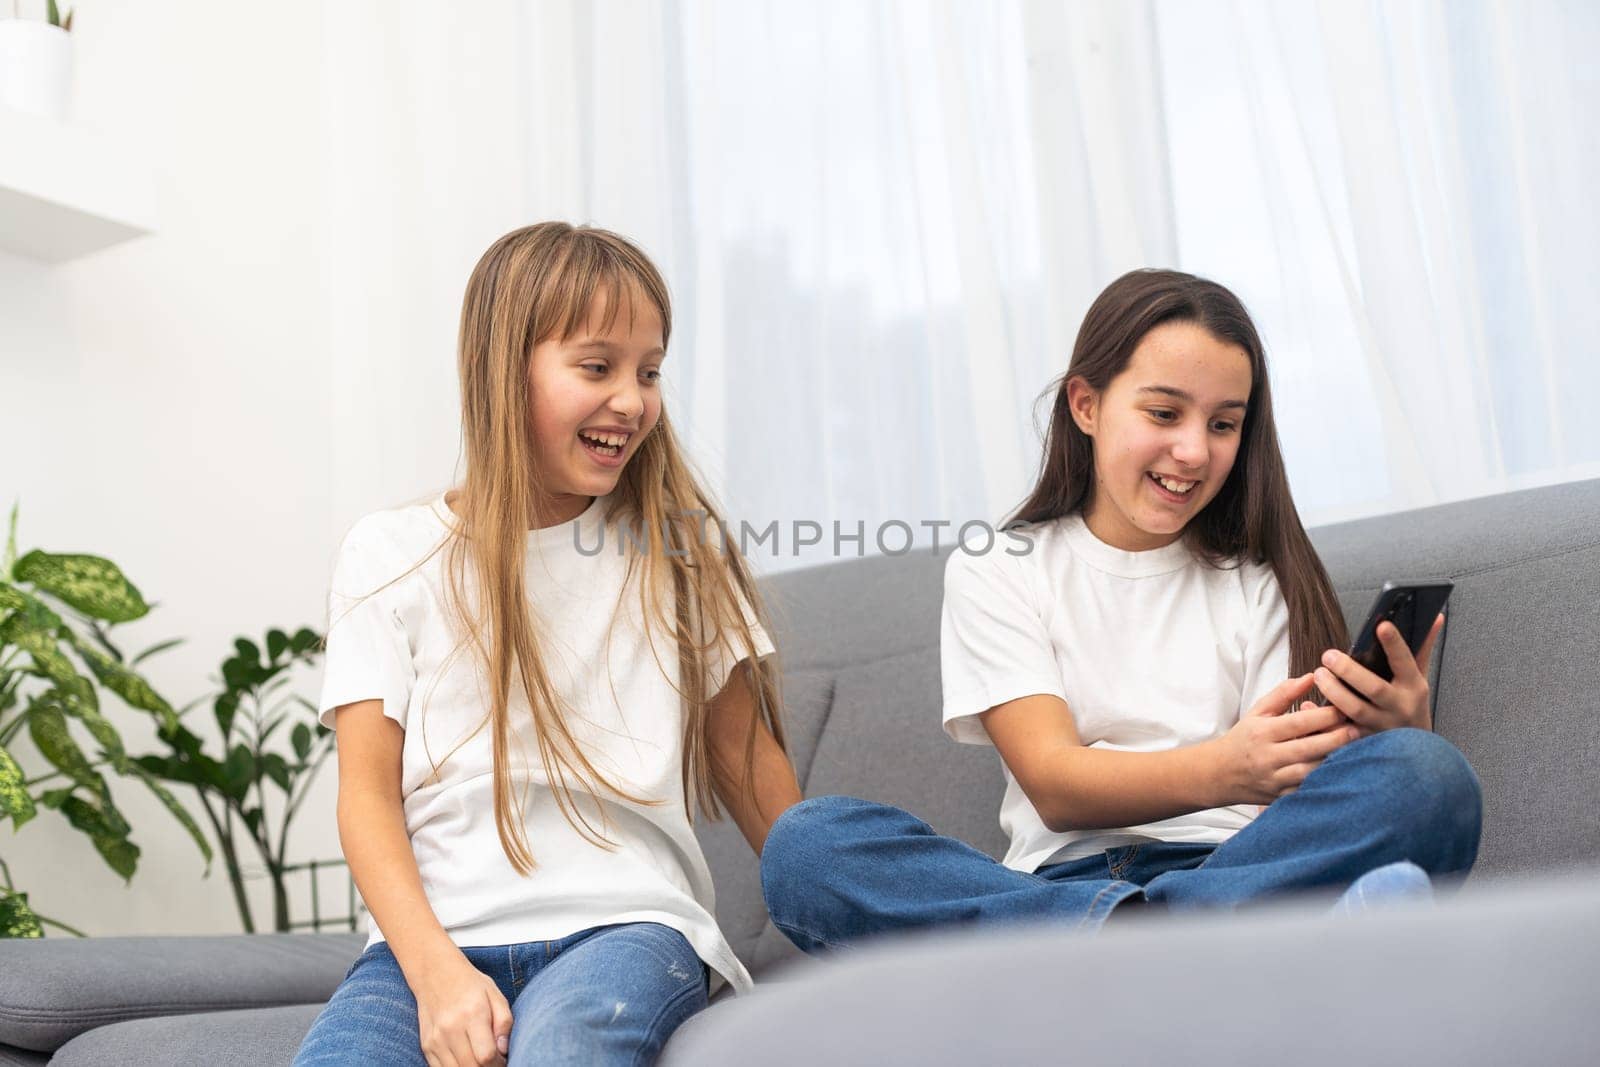 Children play with a mobile phone at home. High quality photo